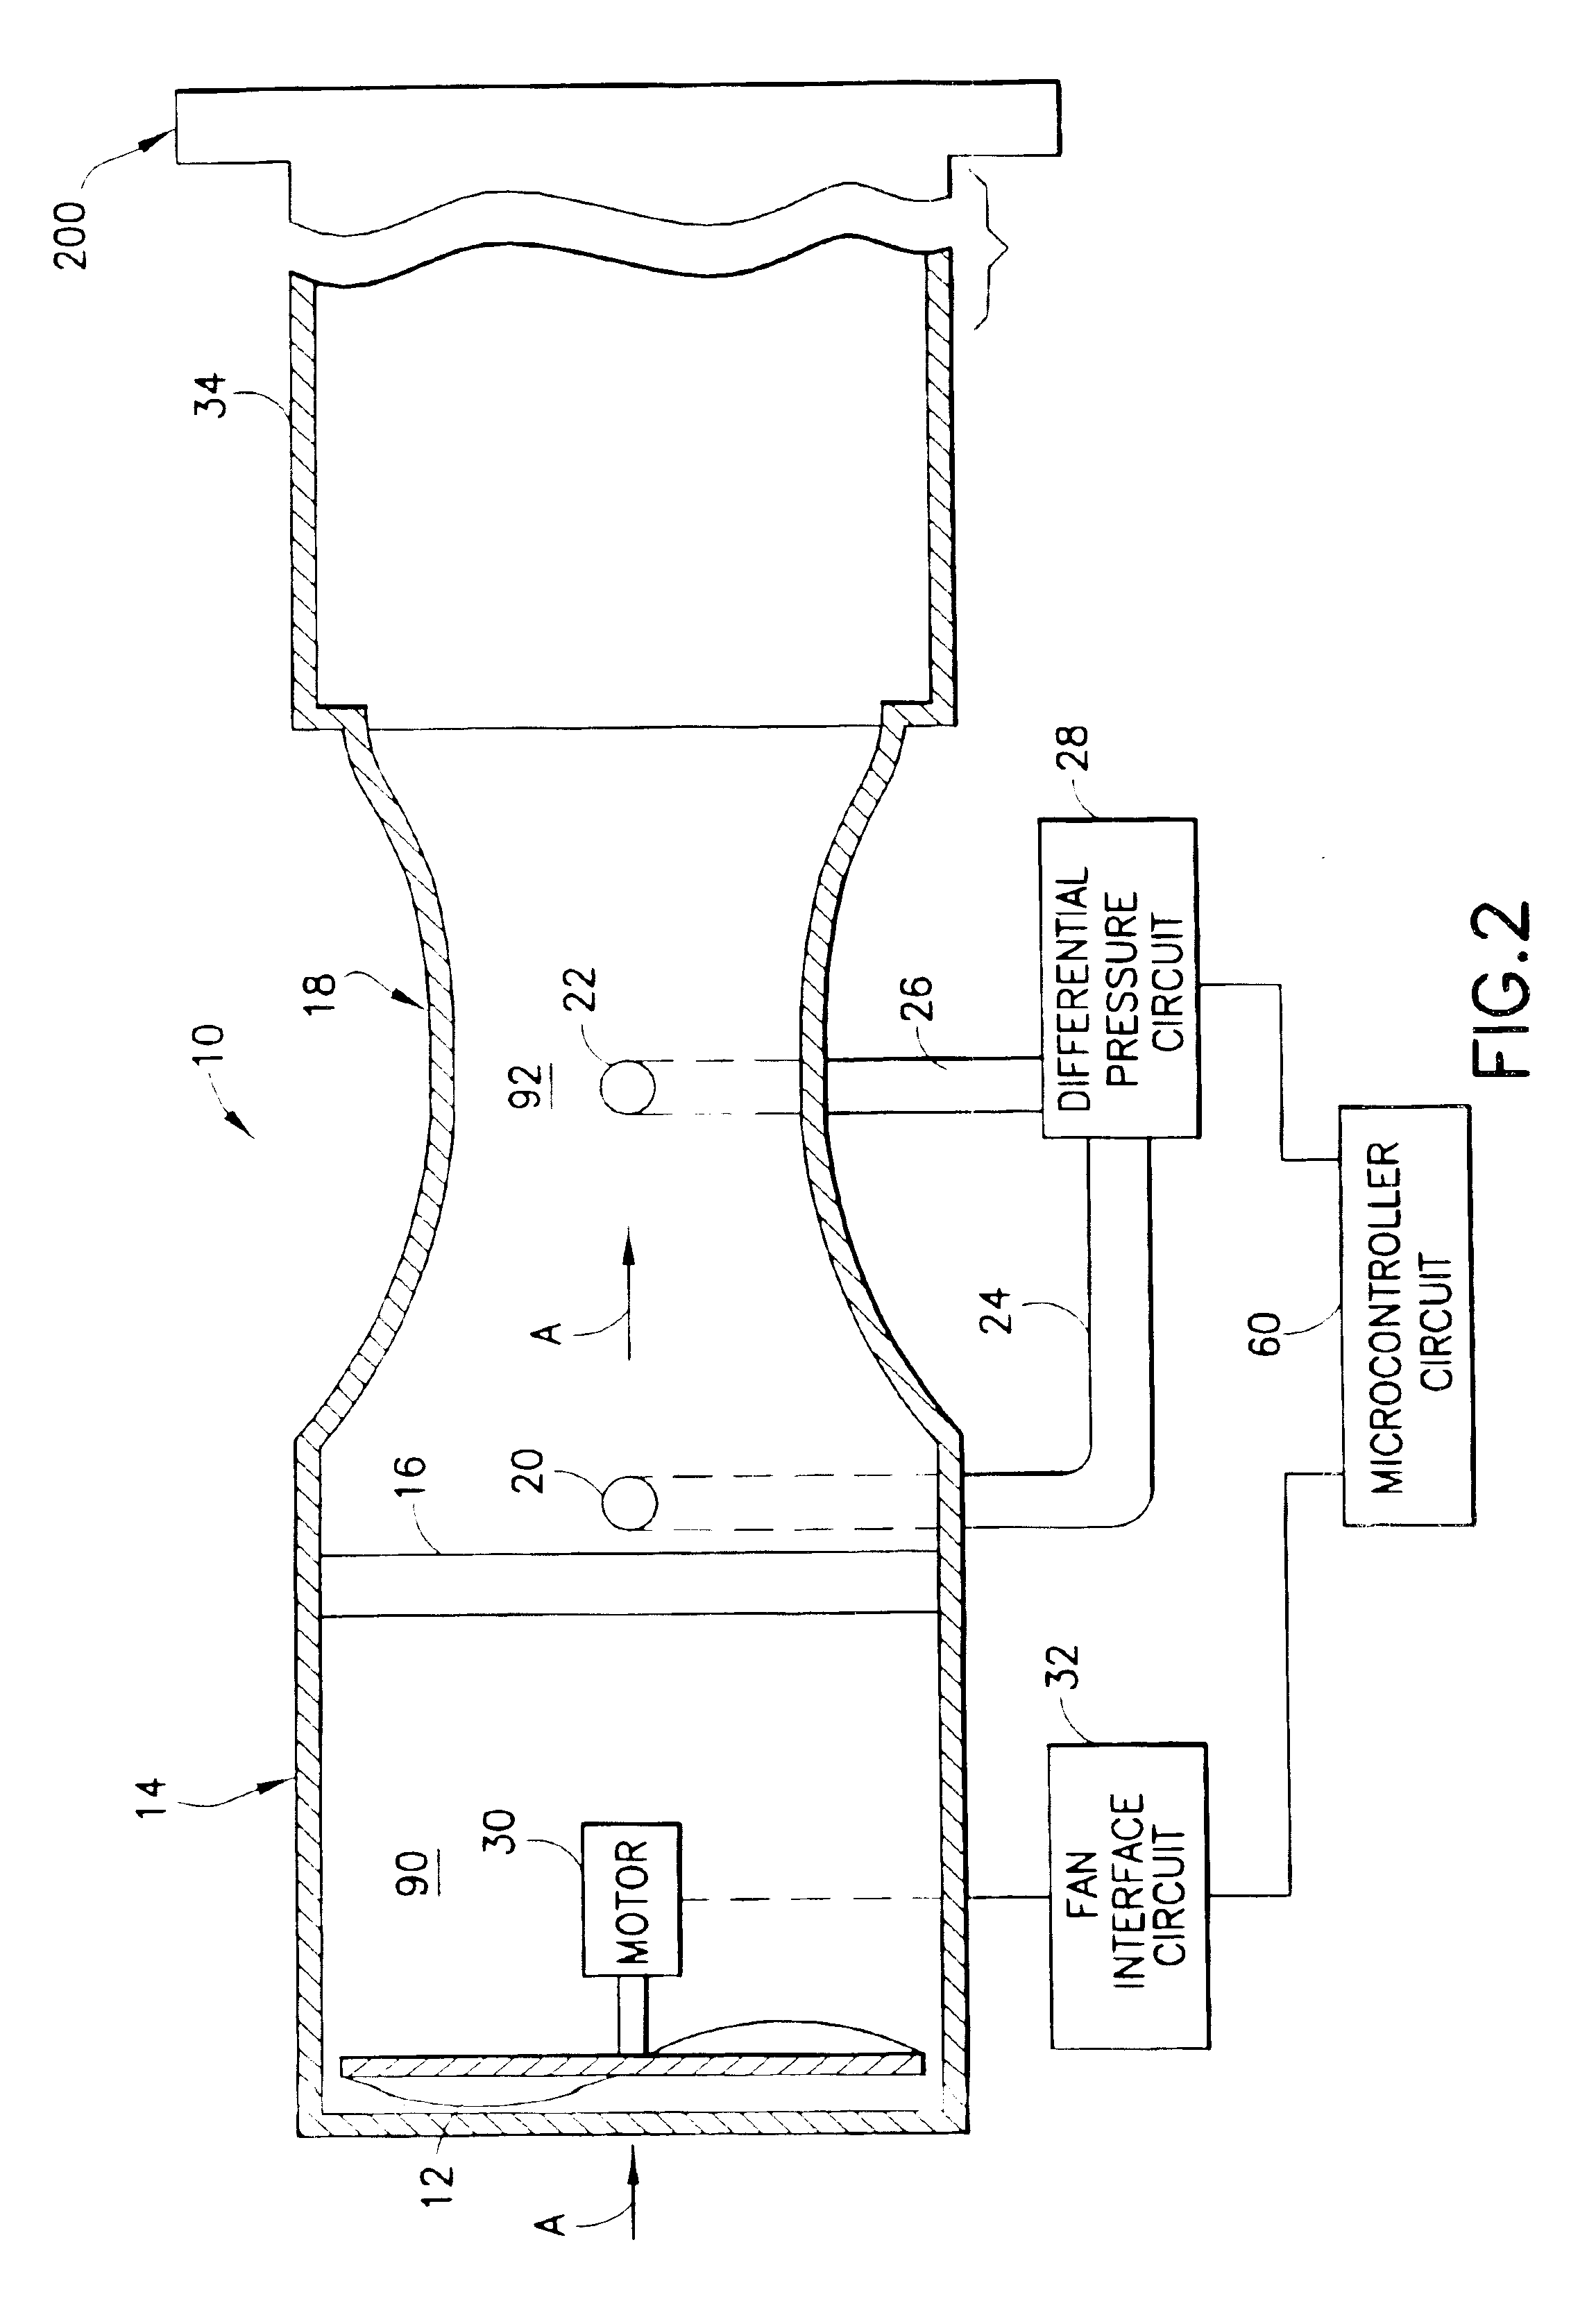 Air flow sensing and control for animal confinement system